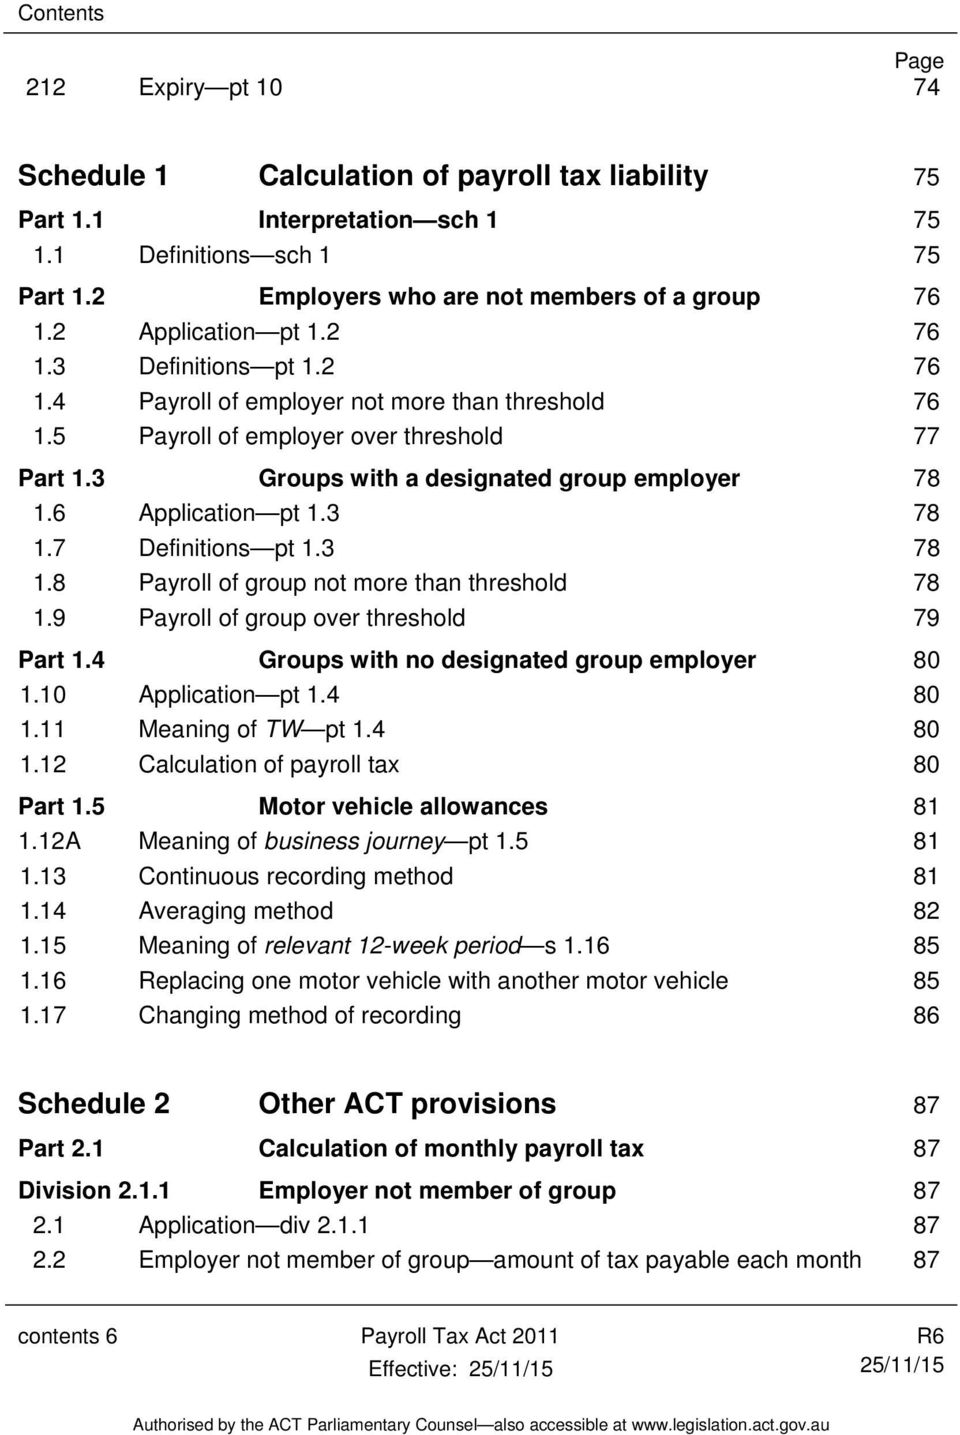 6 Application pt 1.3 78 1.7 Definitions pt 1.3 78 1.8 Payroll of group not more than threshold 78 1.9 Payroll of group over threshold 79 Part 1.4 Groups with no designated group employer 80 1.